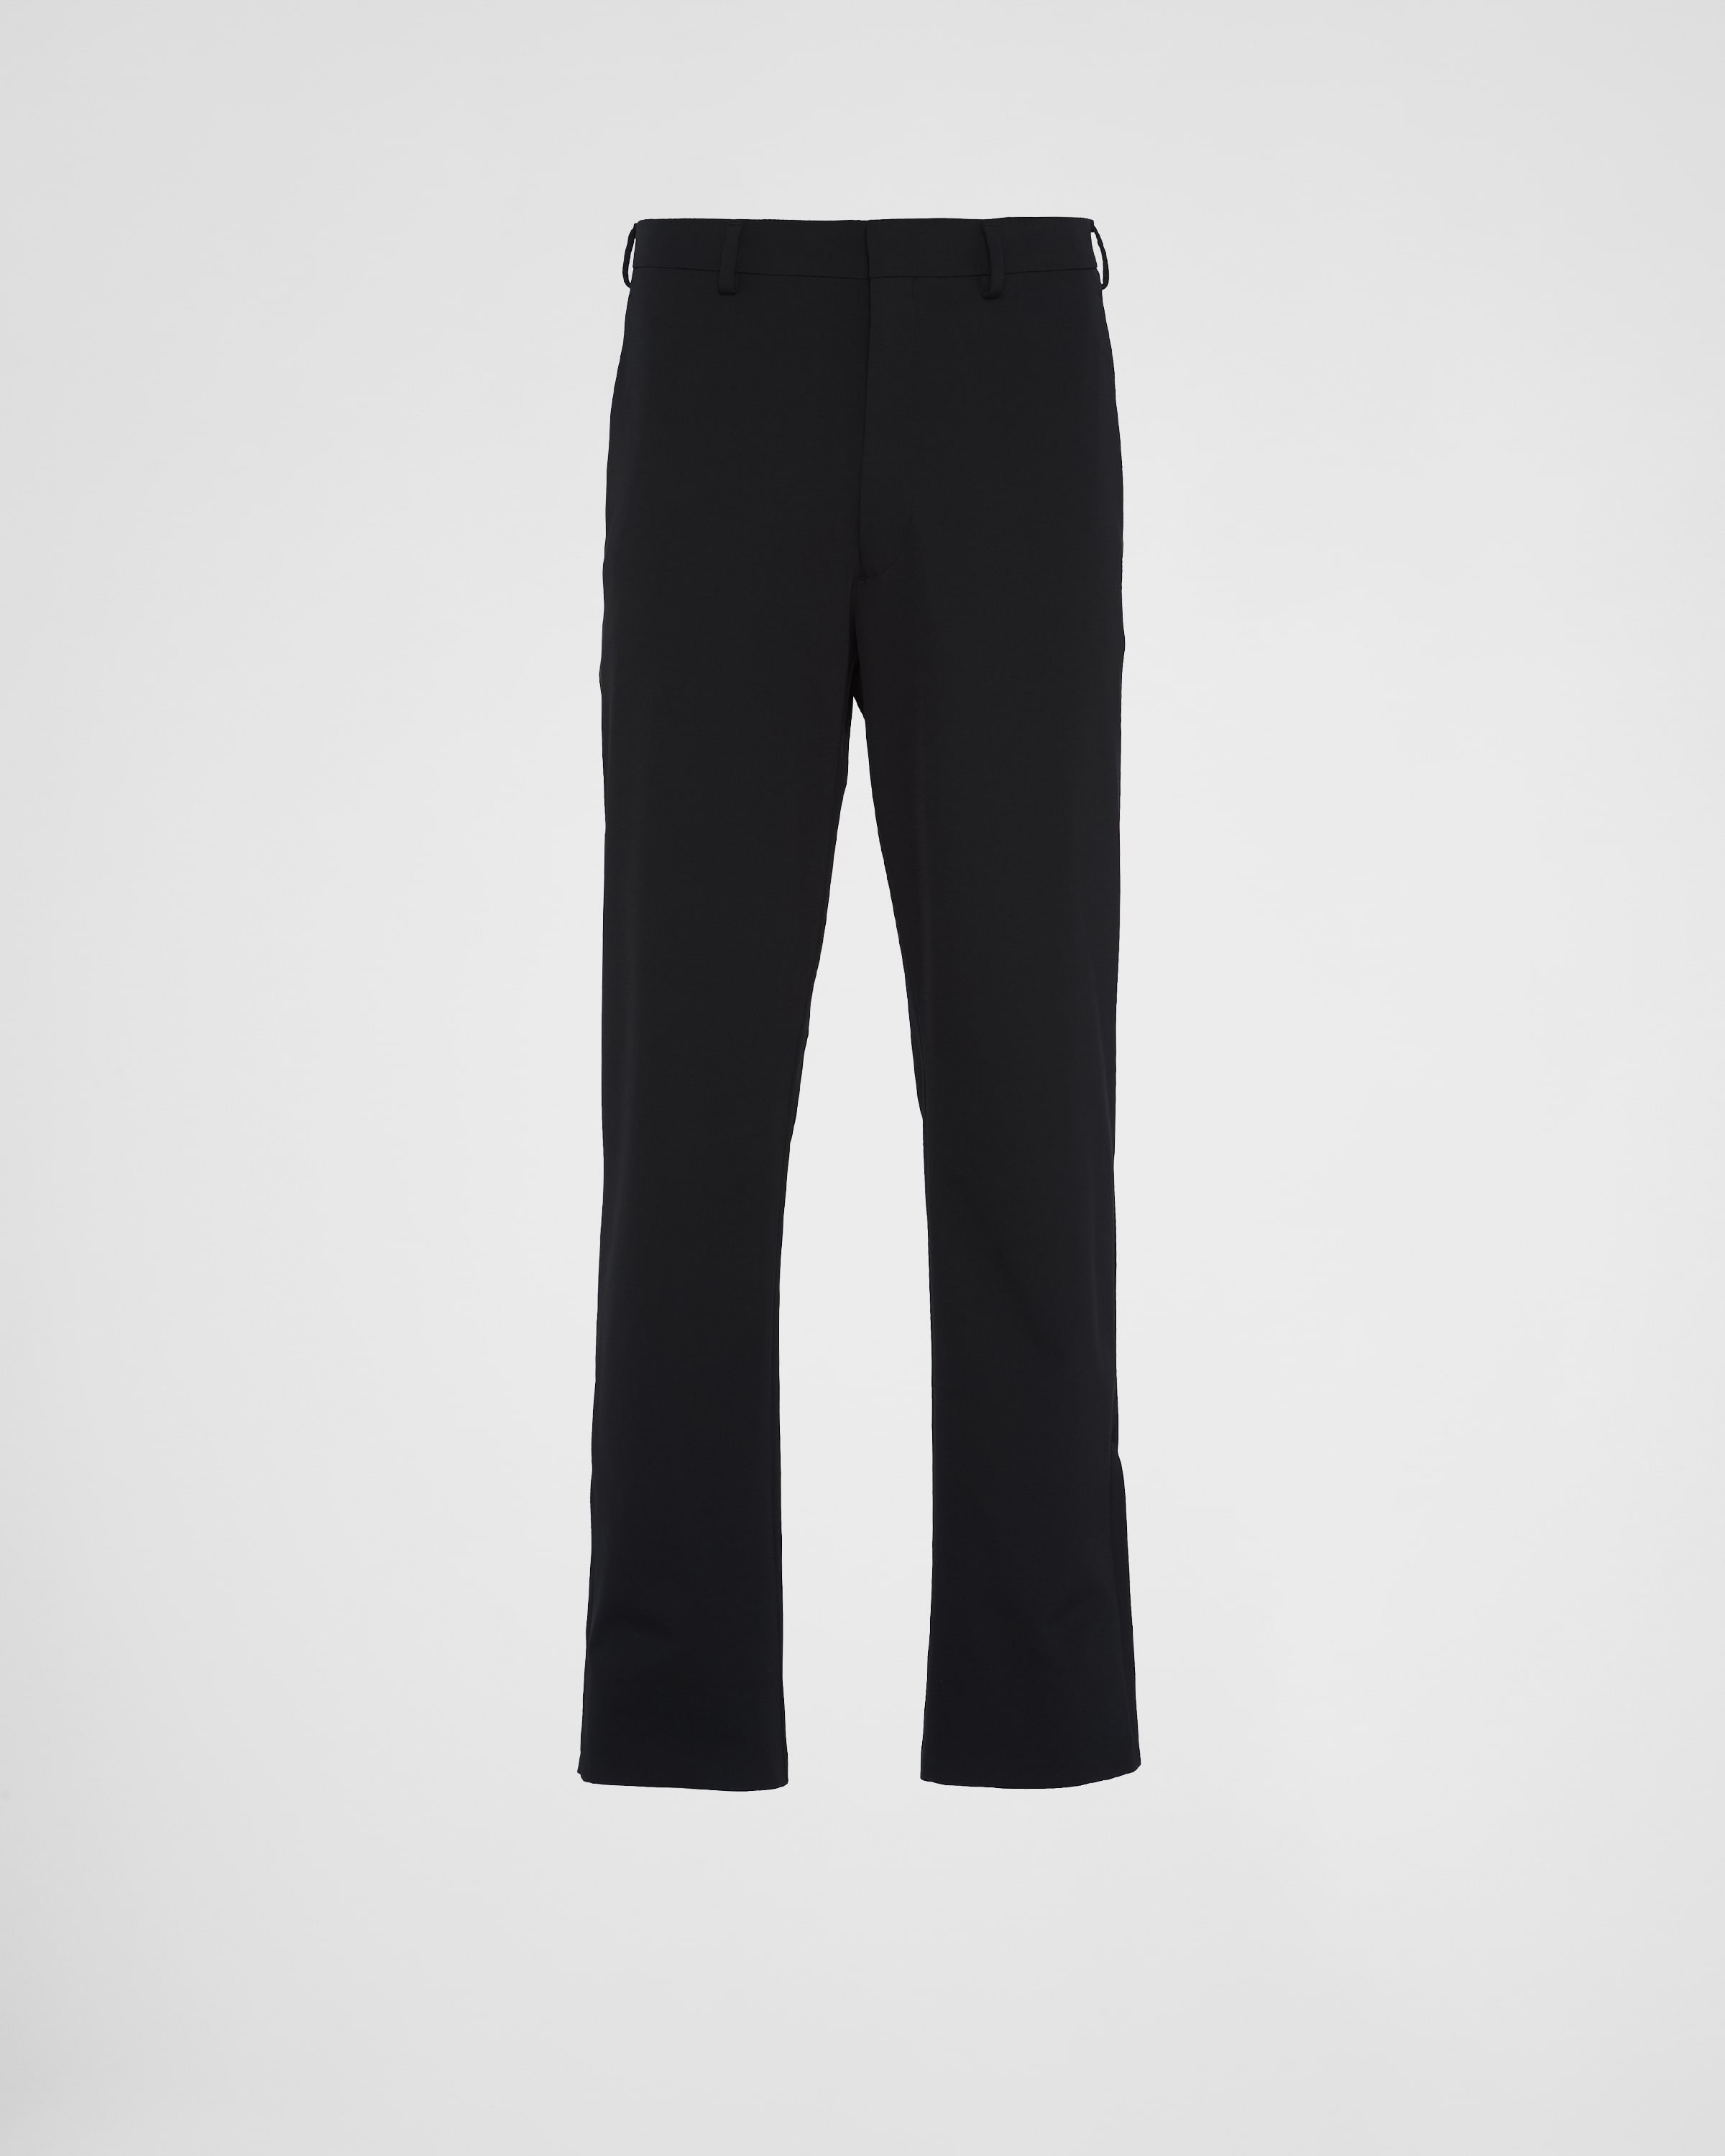 Stretch technical fabric pants - 1